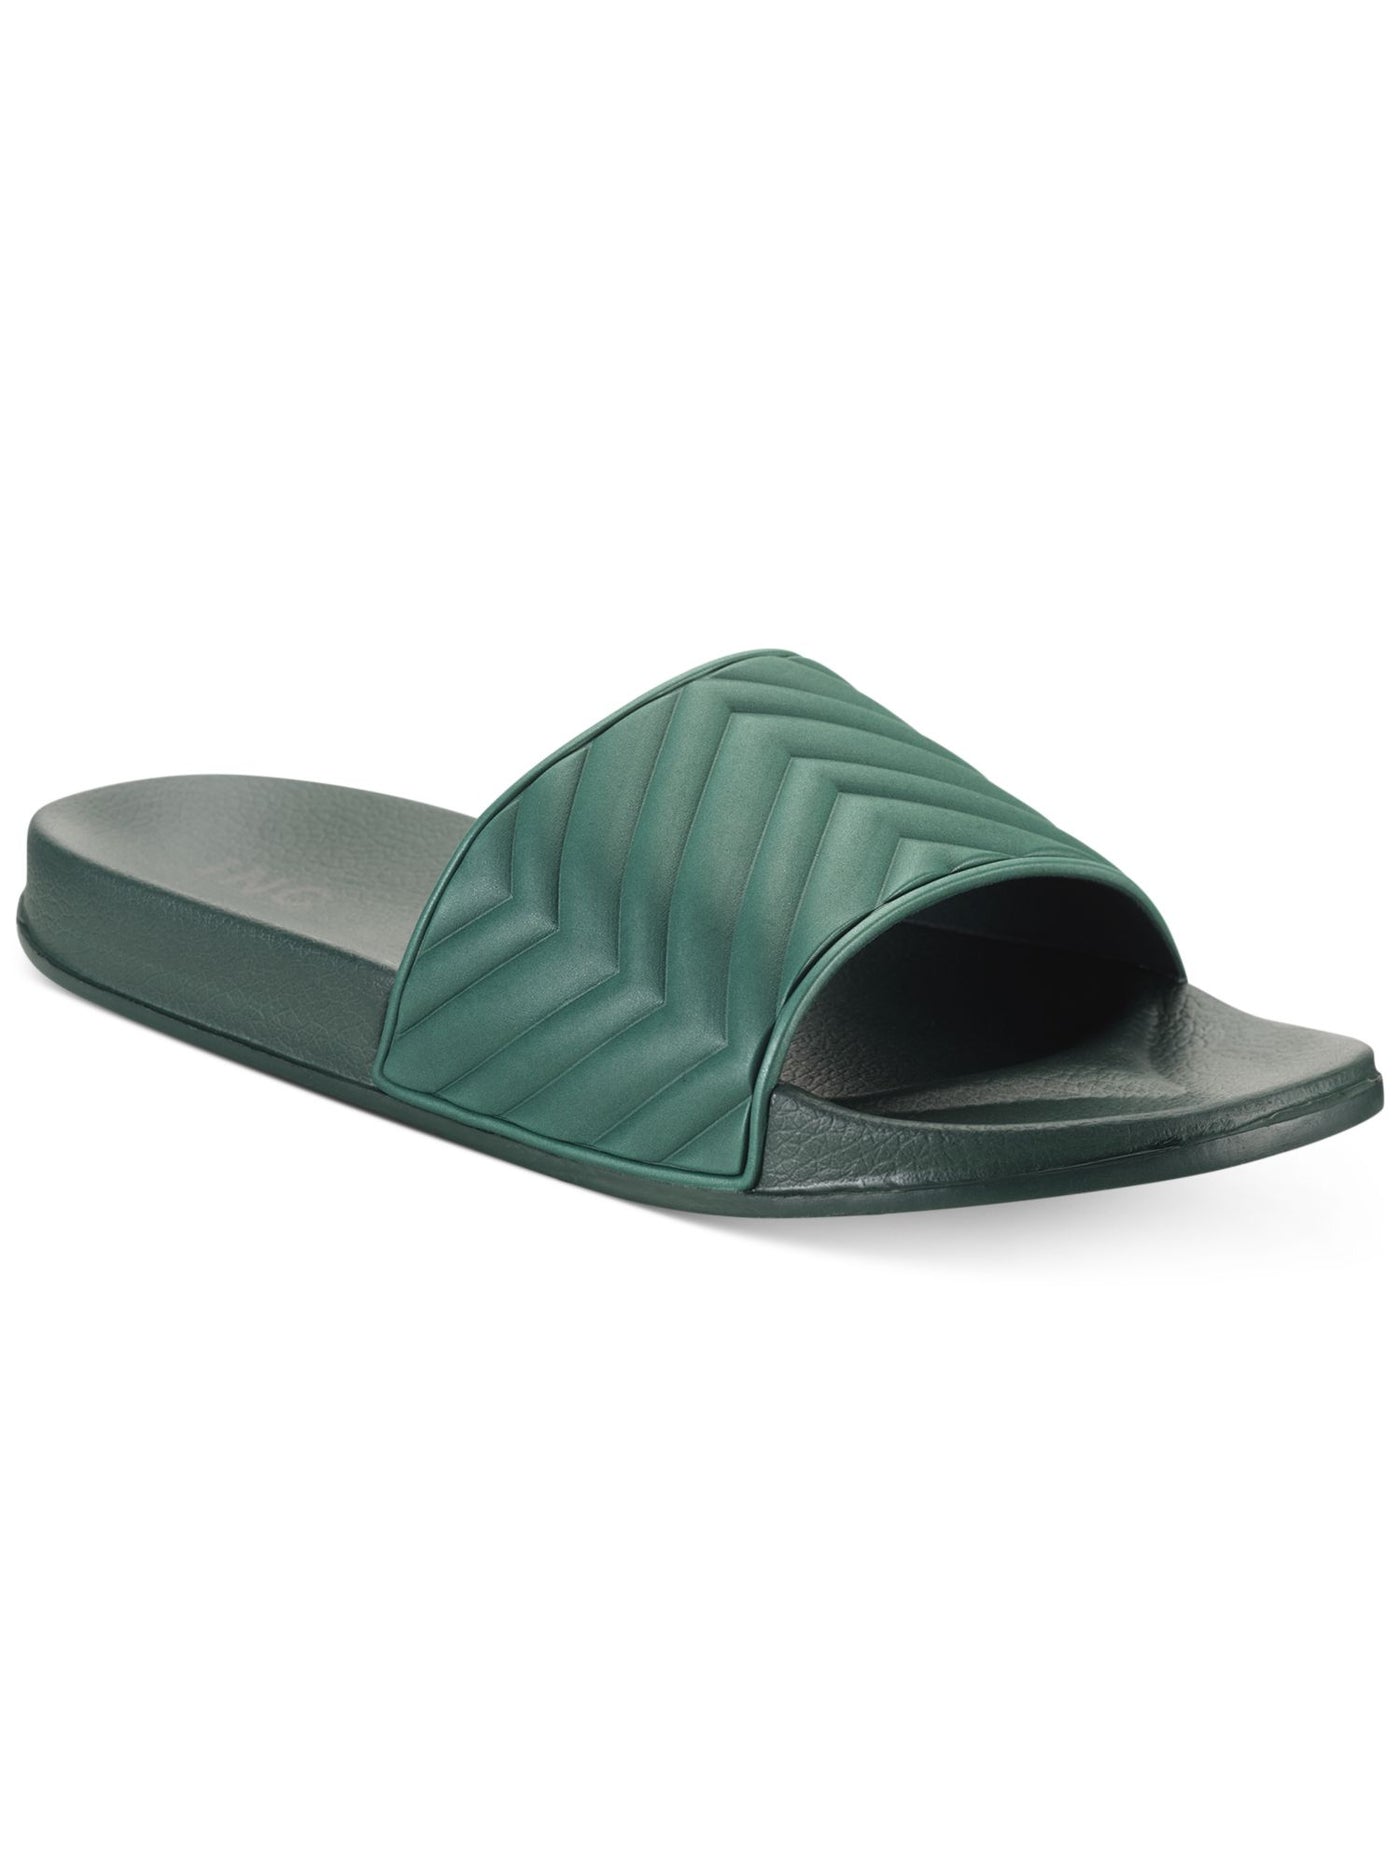 INC Mens Green Quilted Xander Open Toe Slip On Slide Sandals Shoes 9 M